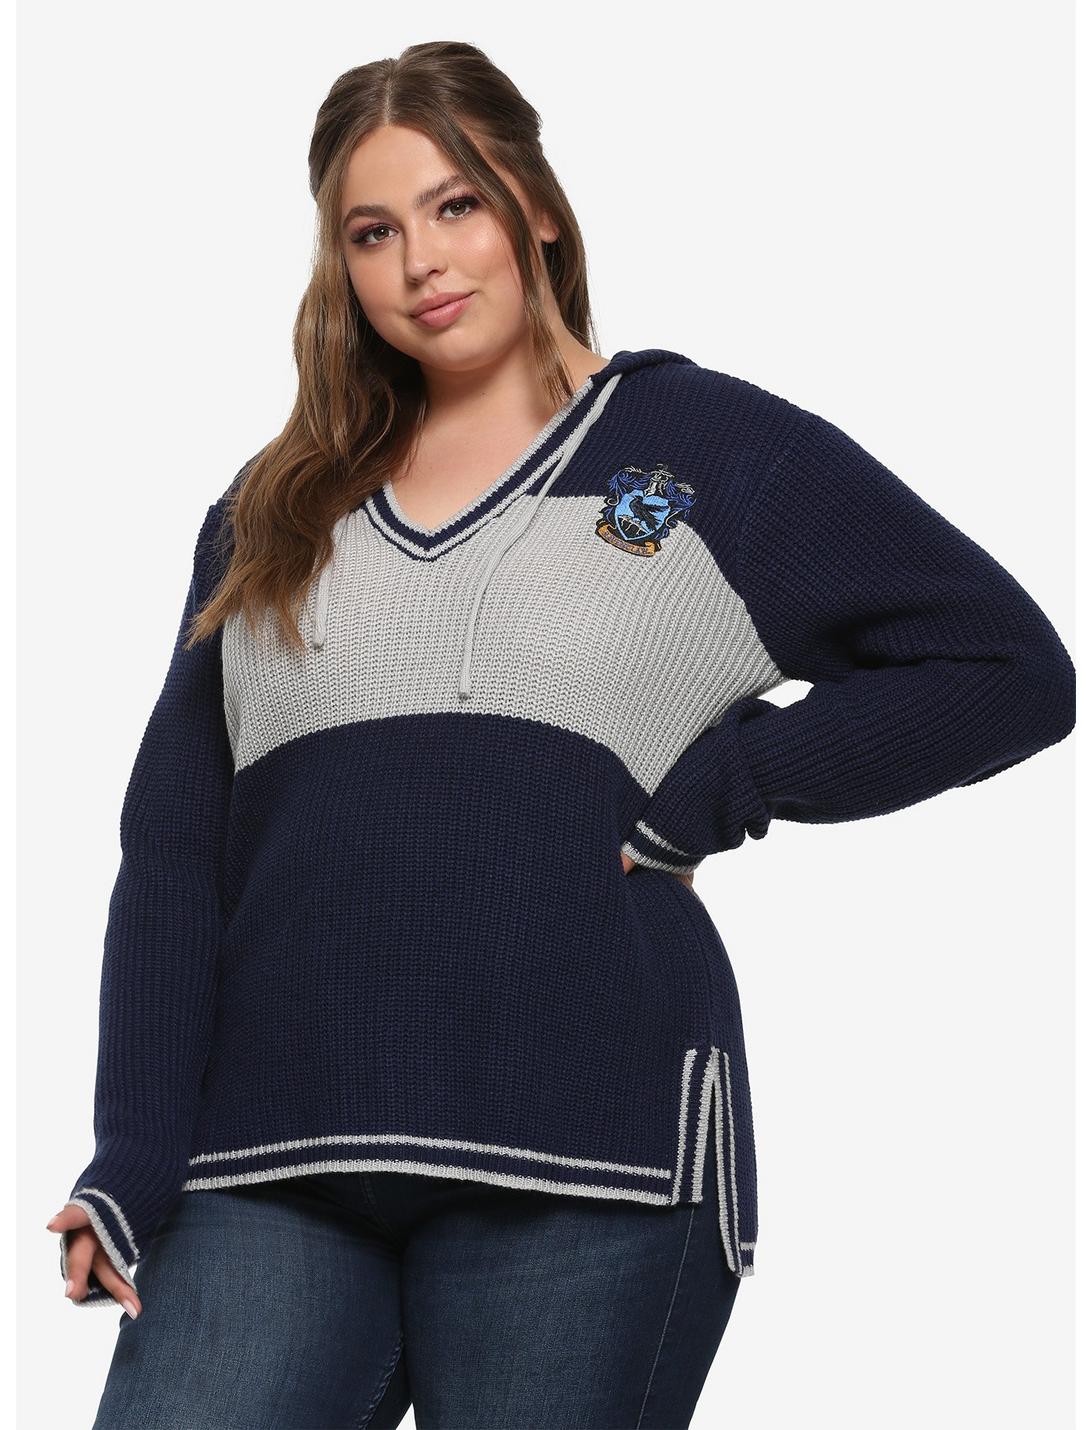 Harry Potter Ravenclaw Hooded Sweater Plus Size, MULTI, hi-res